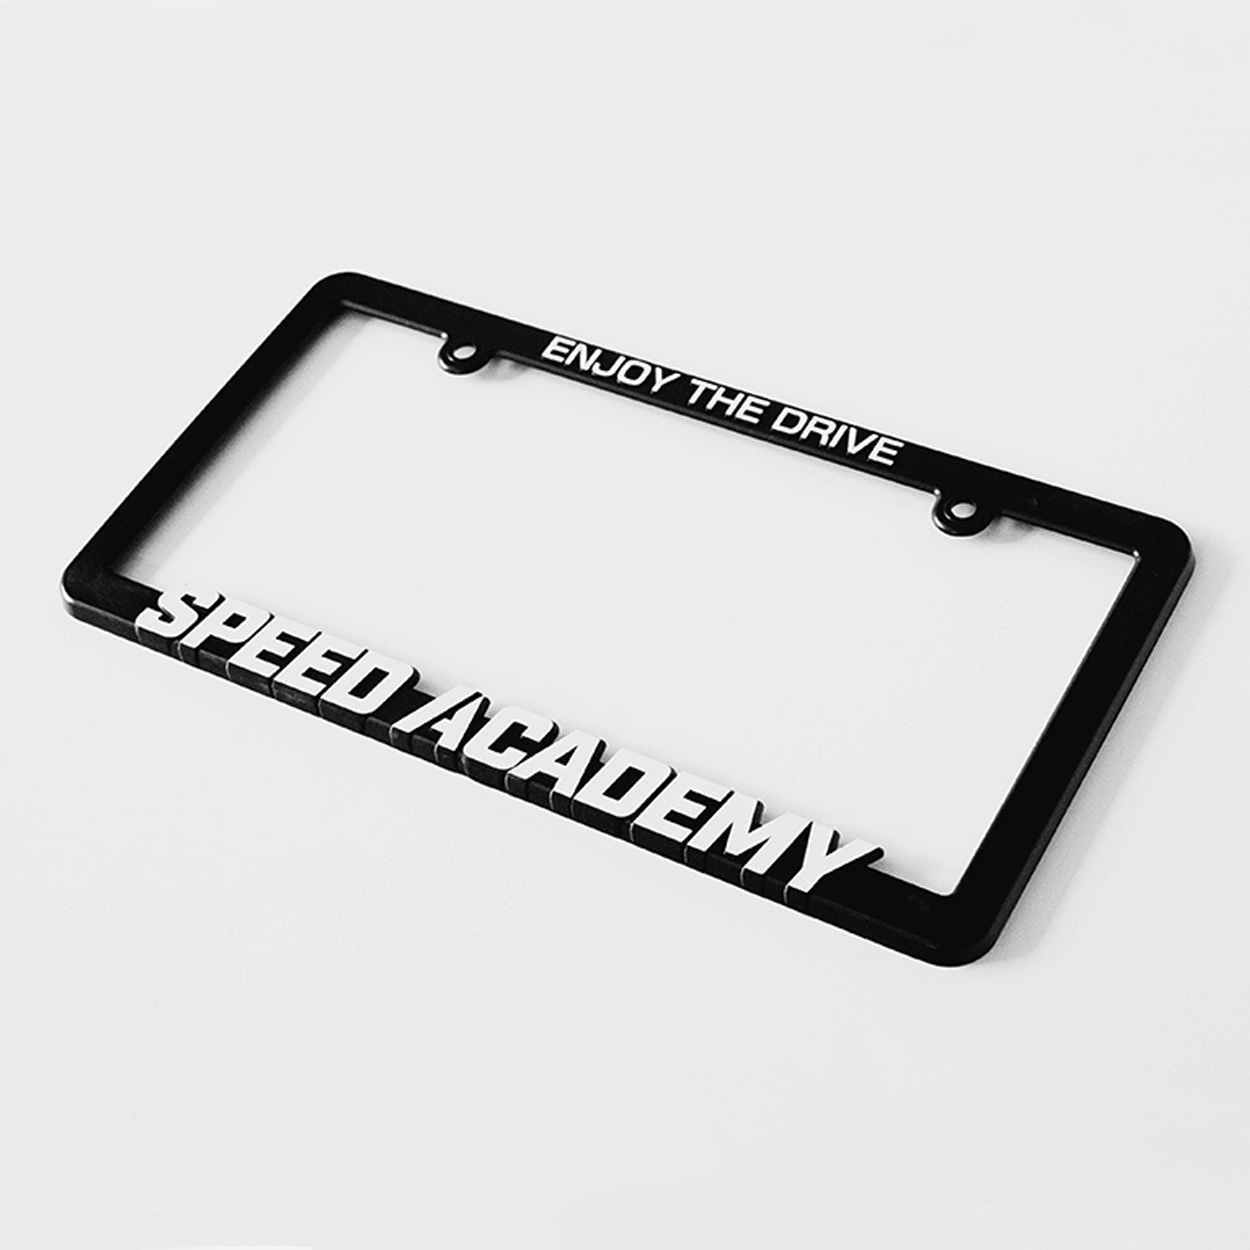 Speed Academy - Enjoy the Drive License Plate Frame